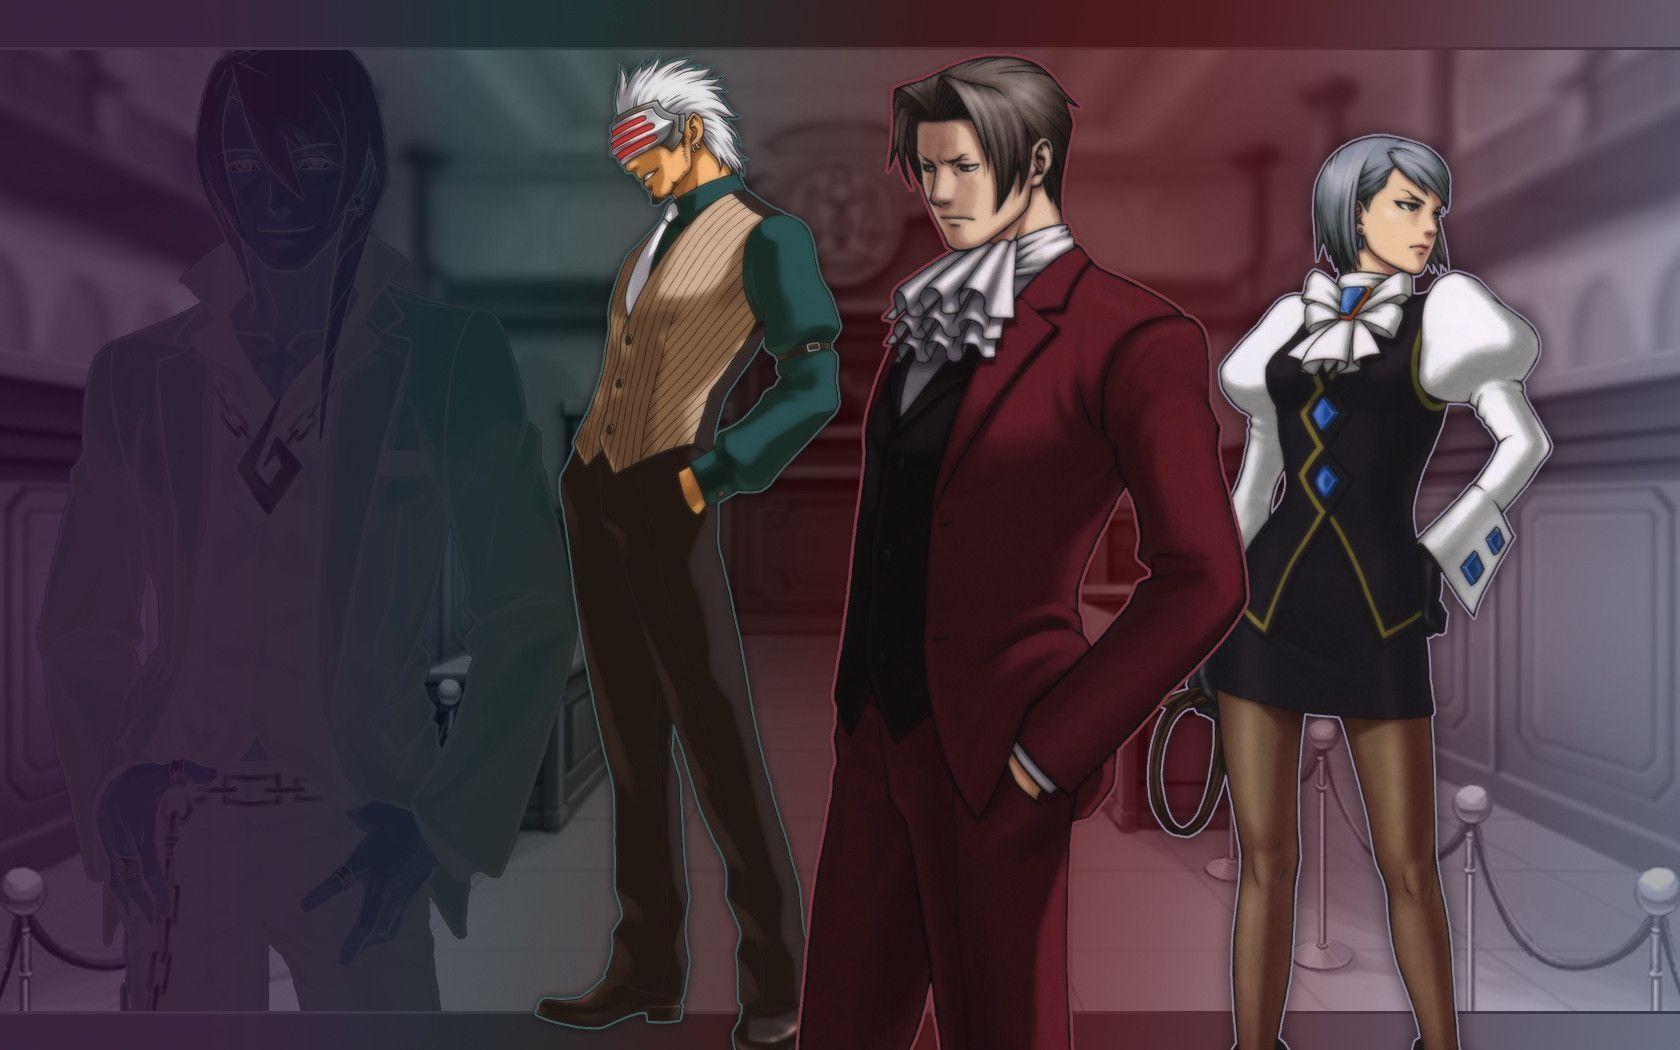 Download Ace Attorney Wallpaper 1280x1024 #